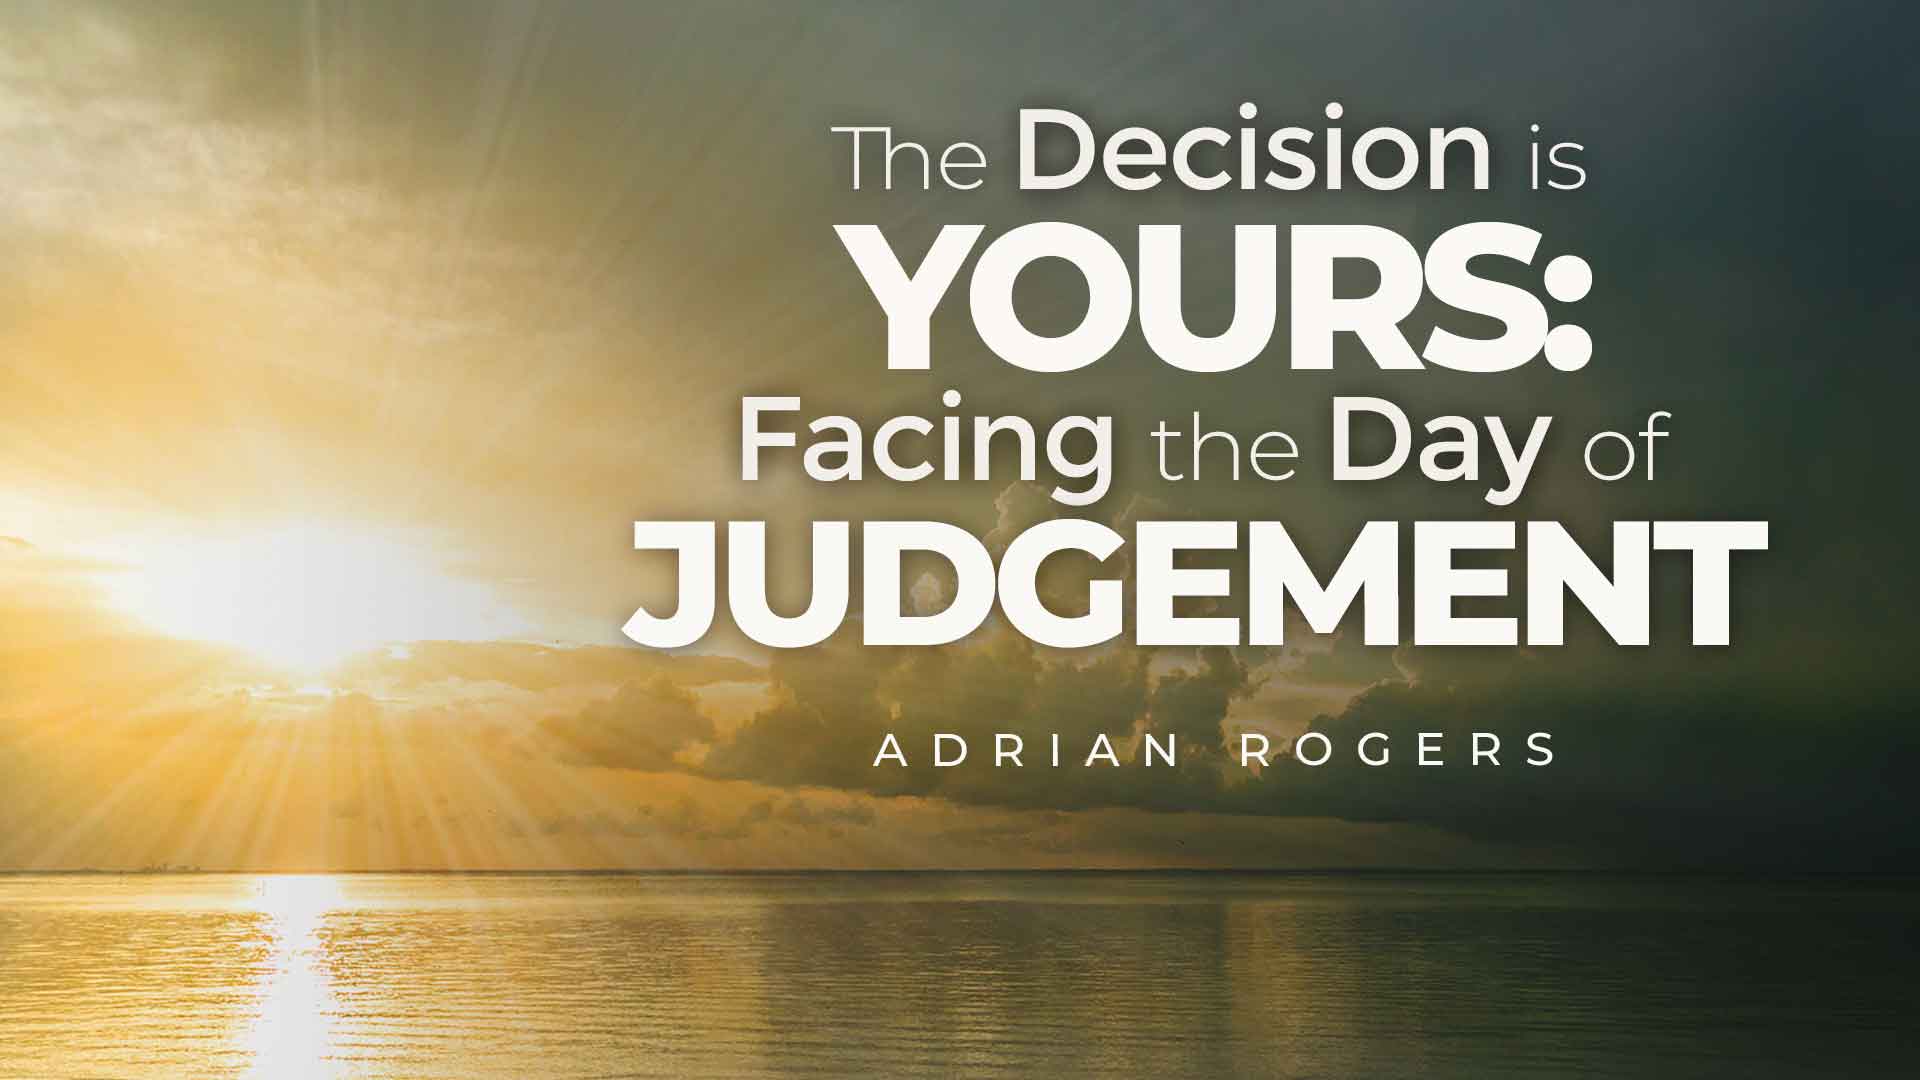 The Decision Yours Facing Judgement 1920x1080